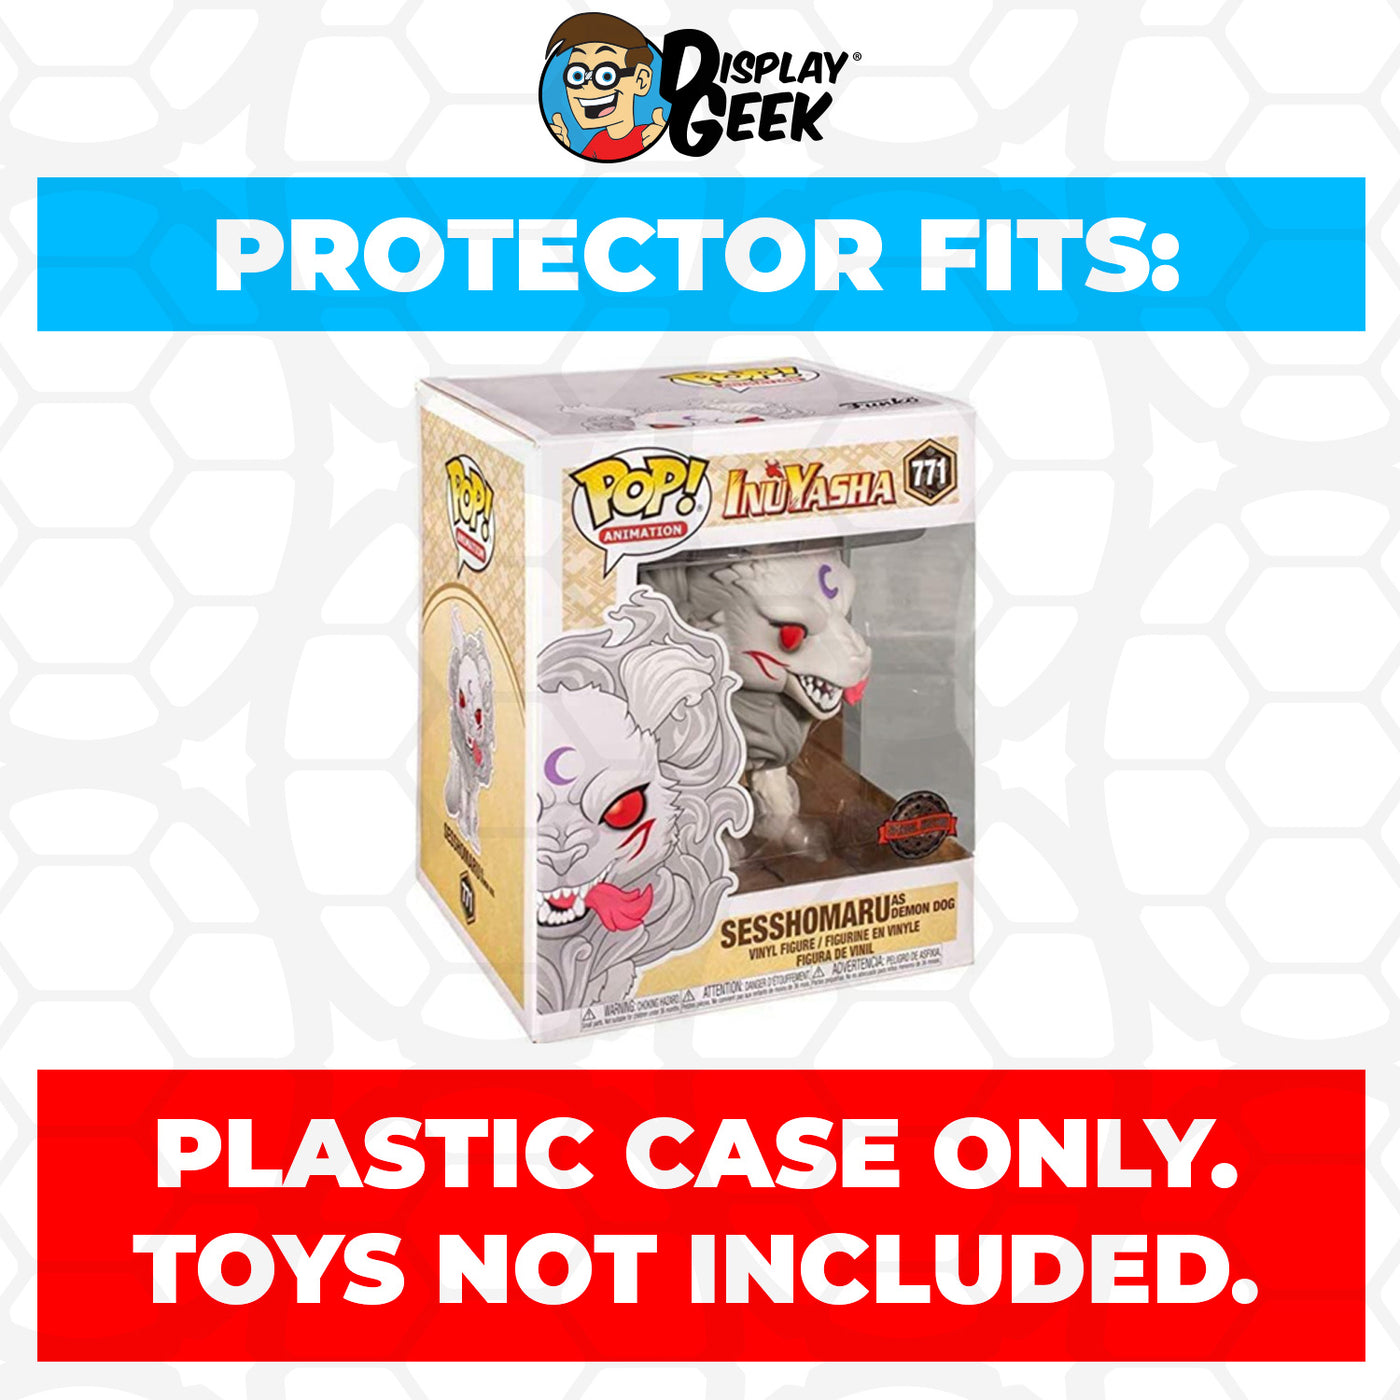 Pop Protector for 6 inch Sesshomaru as Demon Dog #771 Super Funko Pop on The Protector Guide App by Display Geek